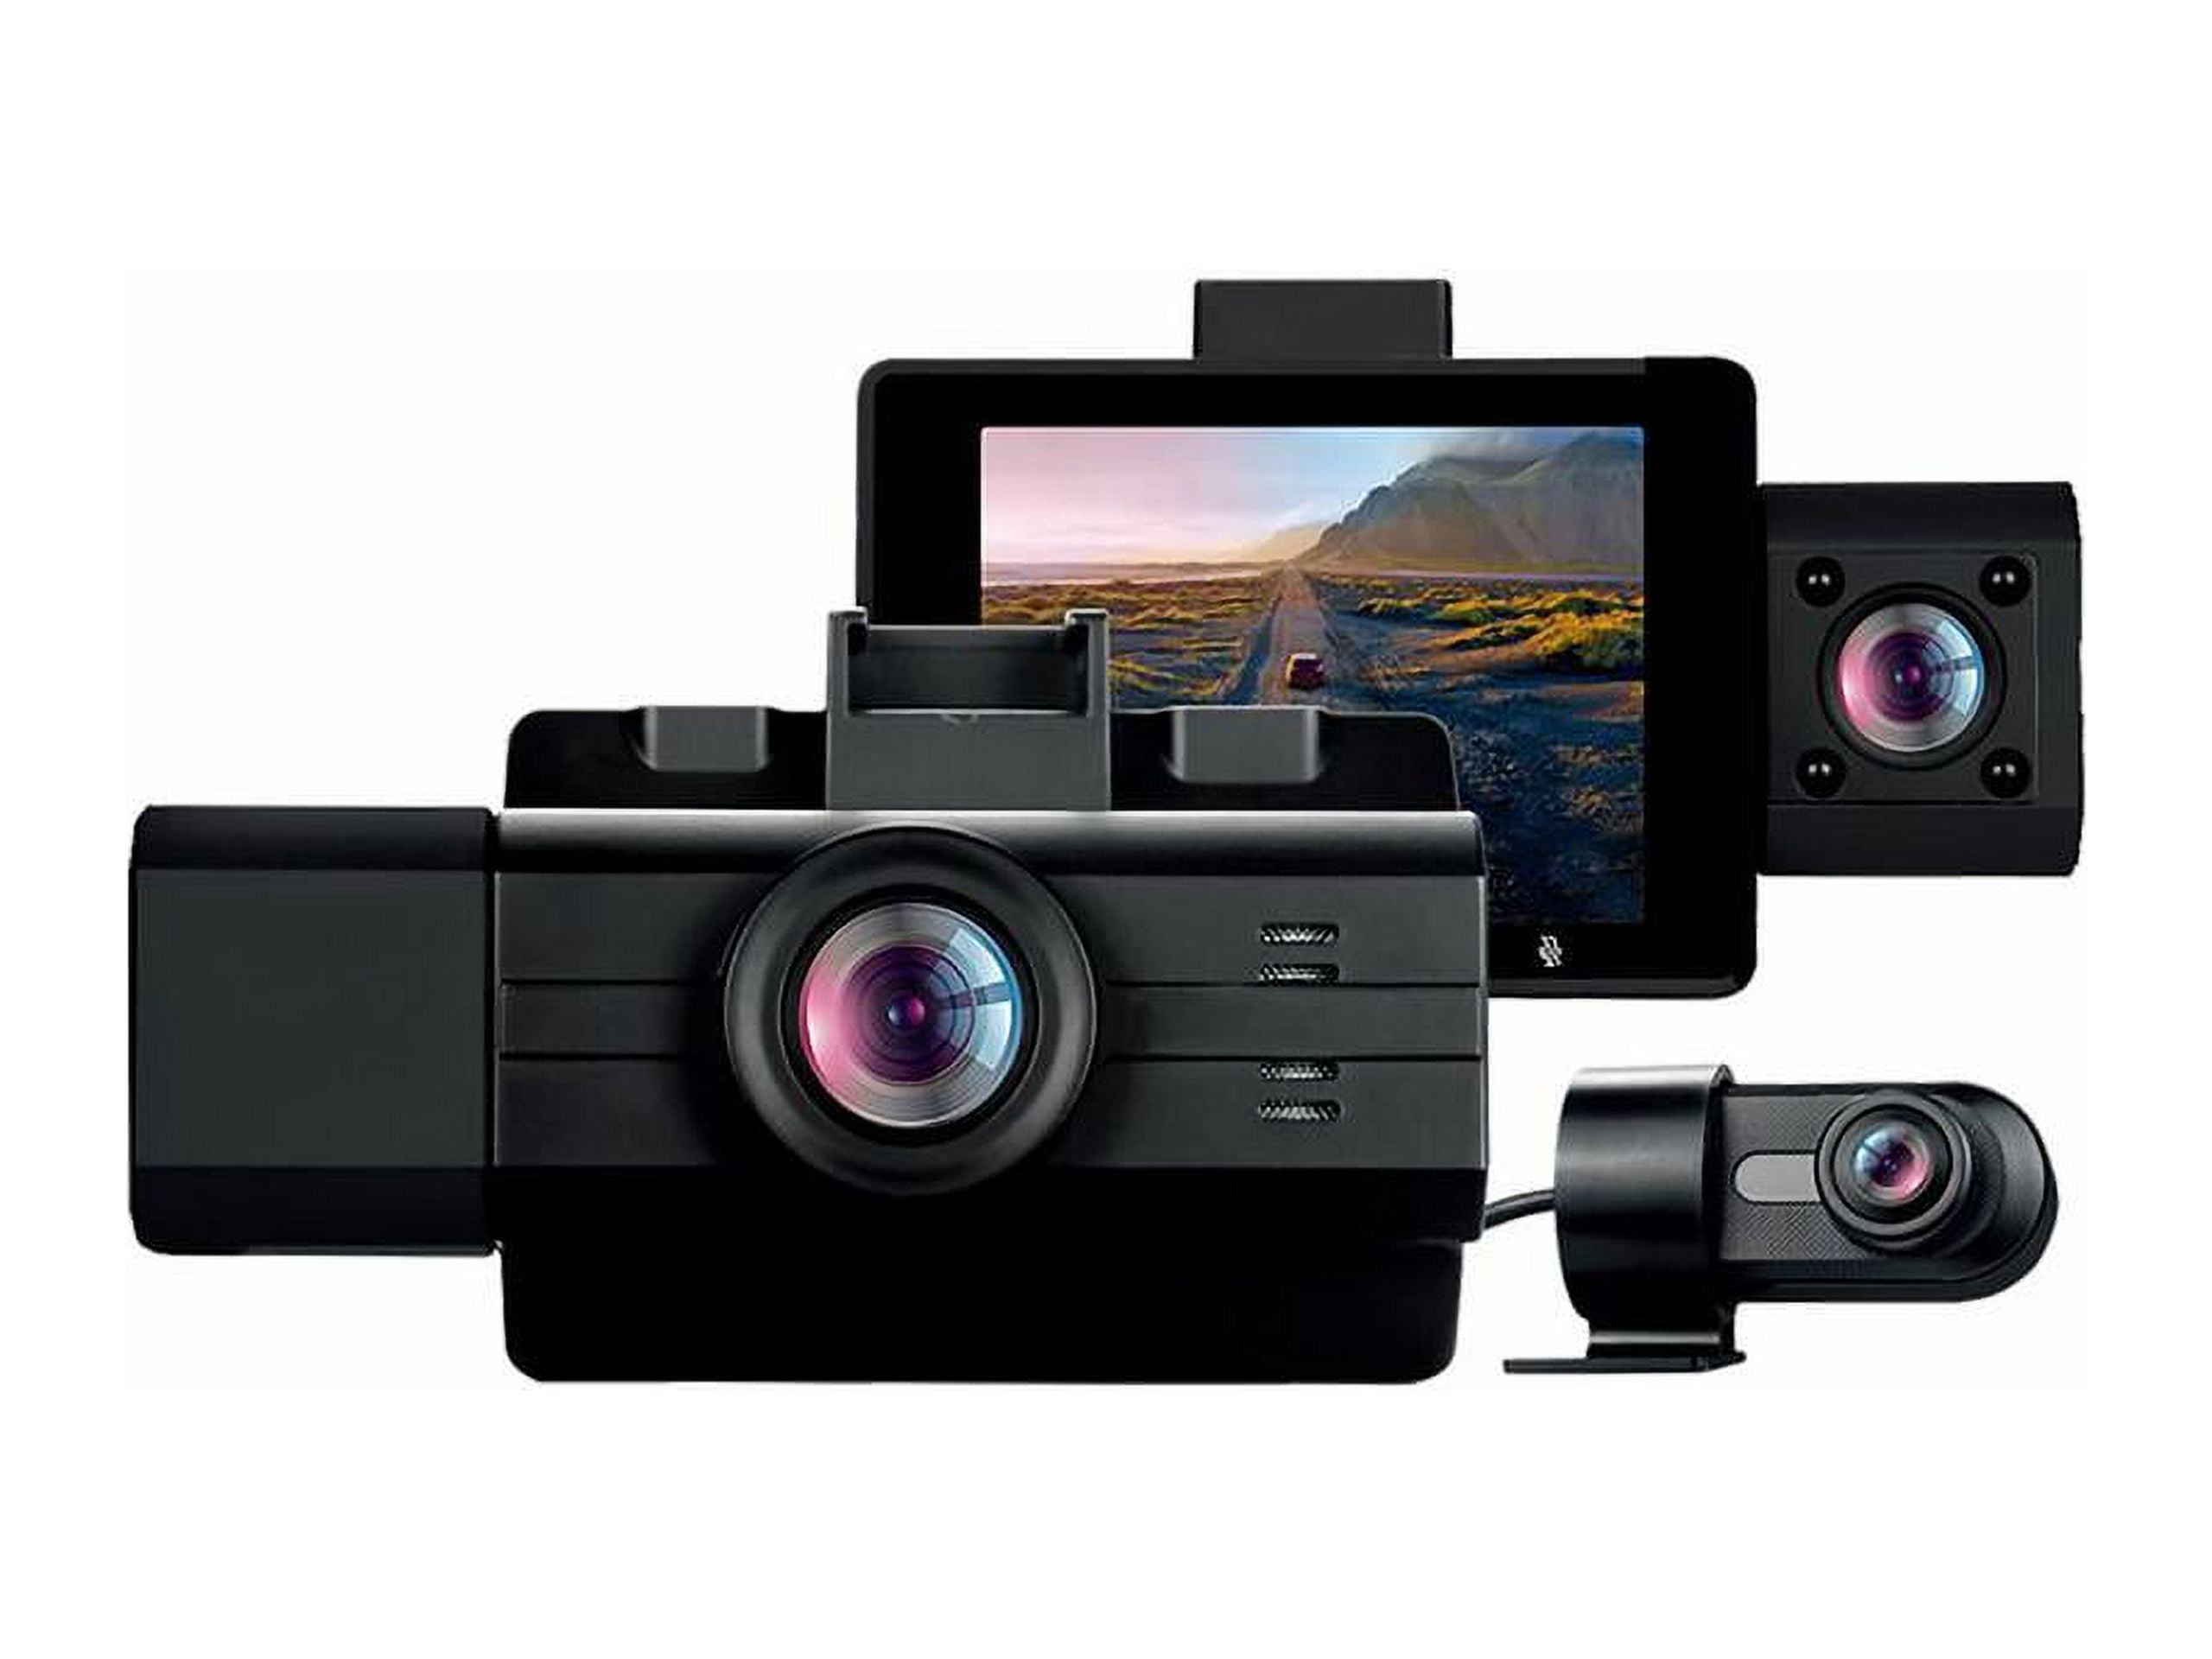 NEXPOW Car Dash Cam 3 Channel, 4k Dash Camera Front and Rear